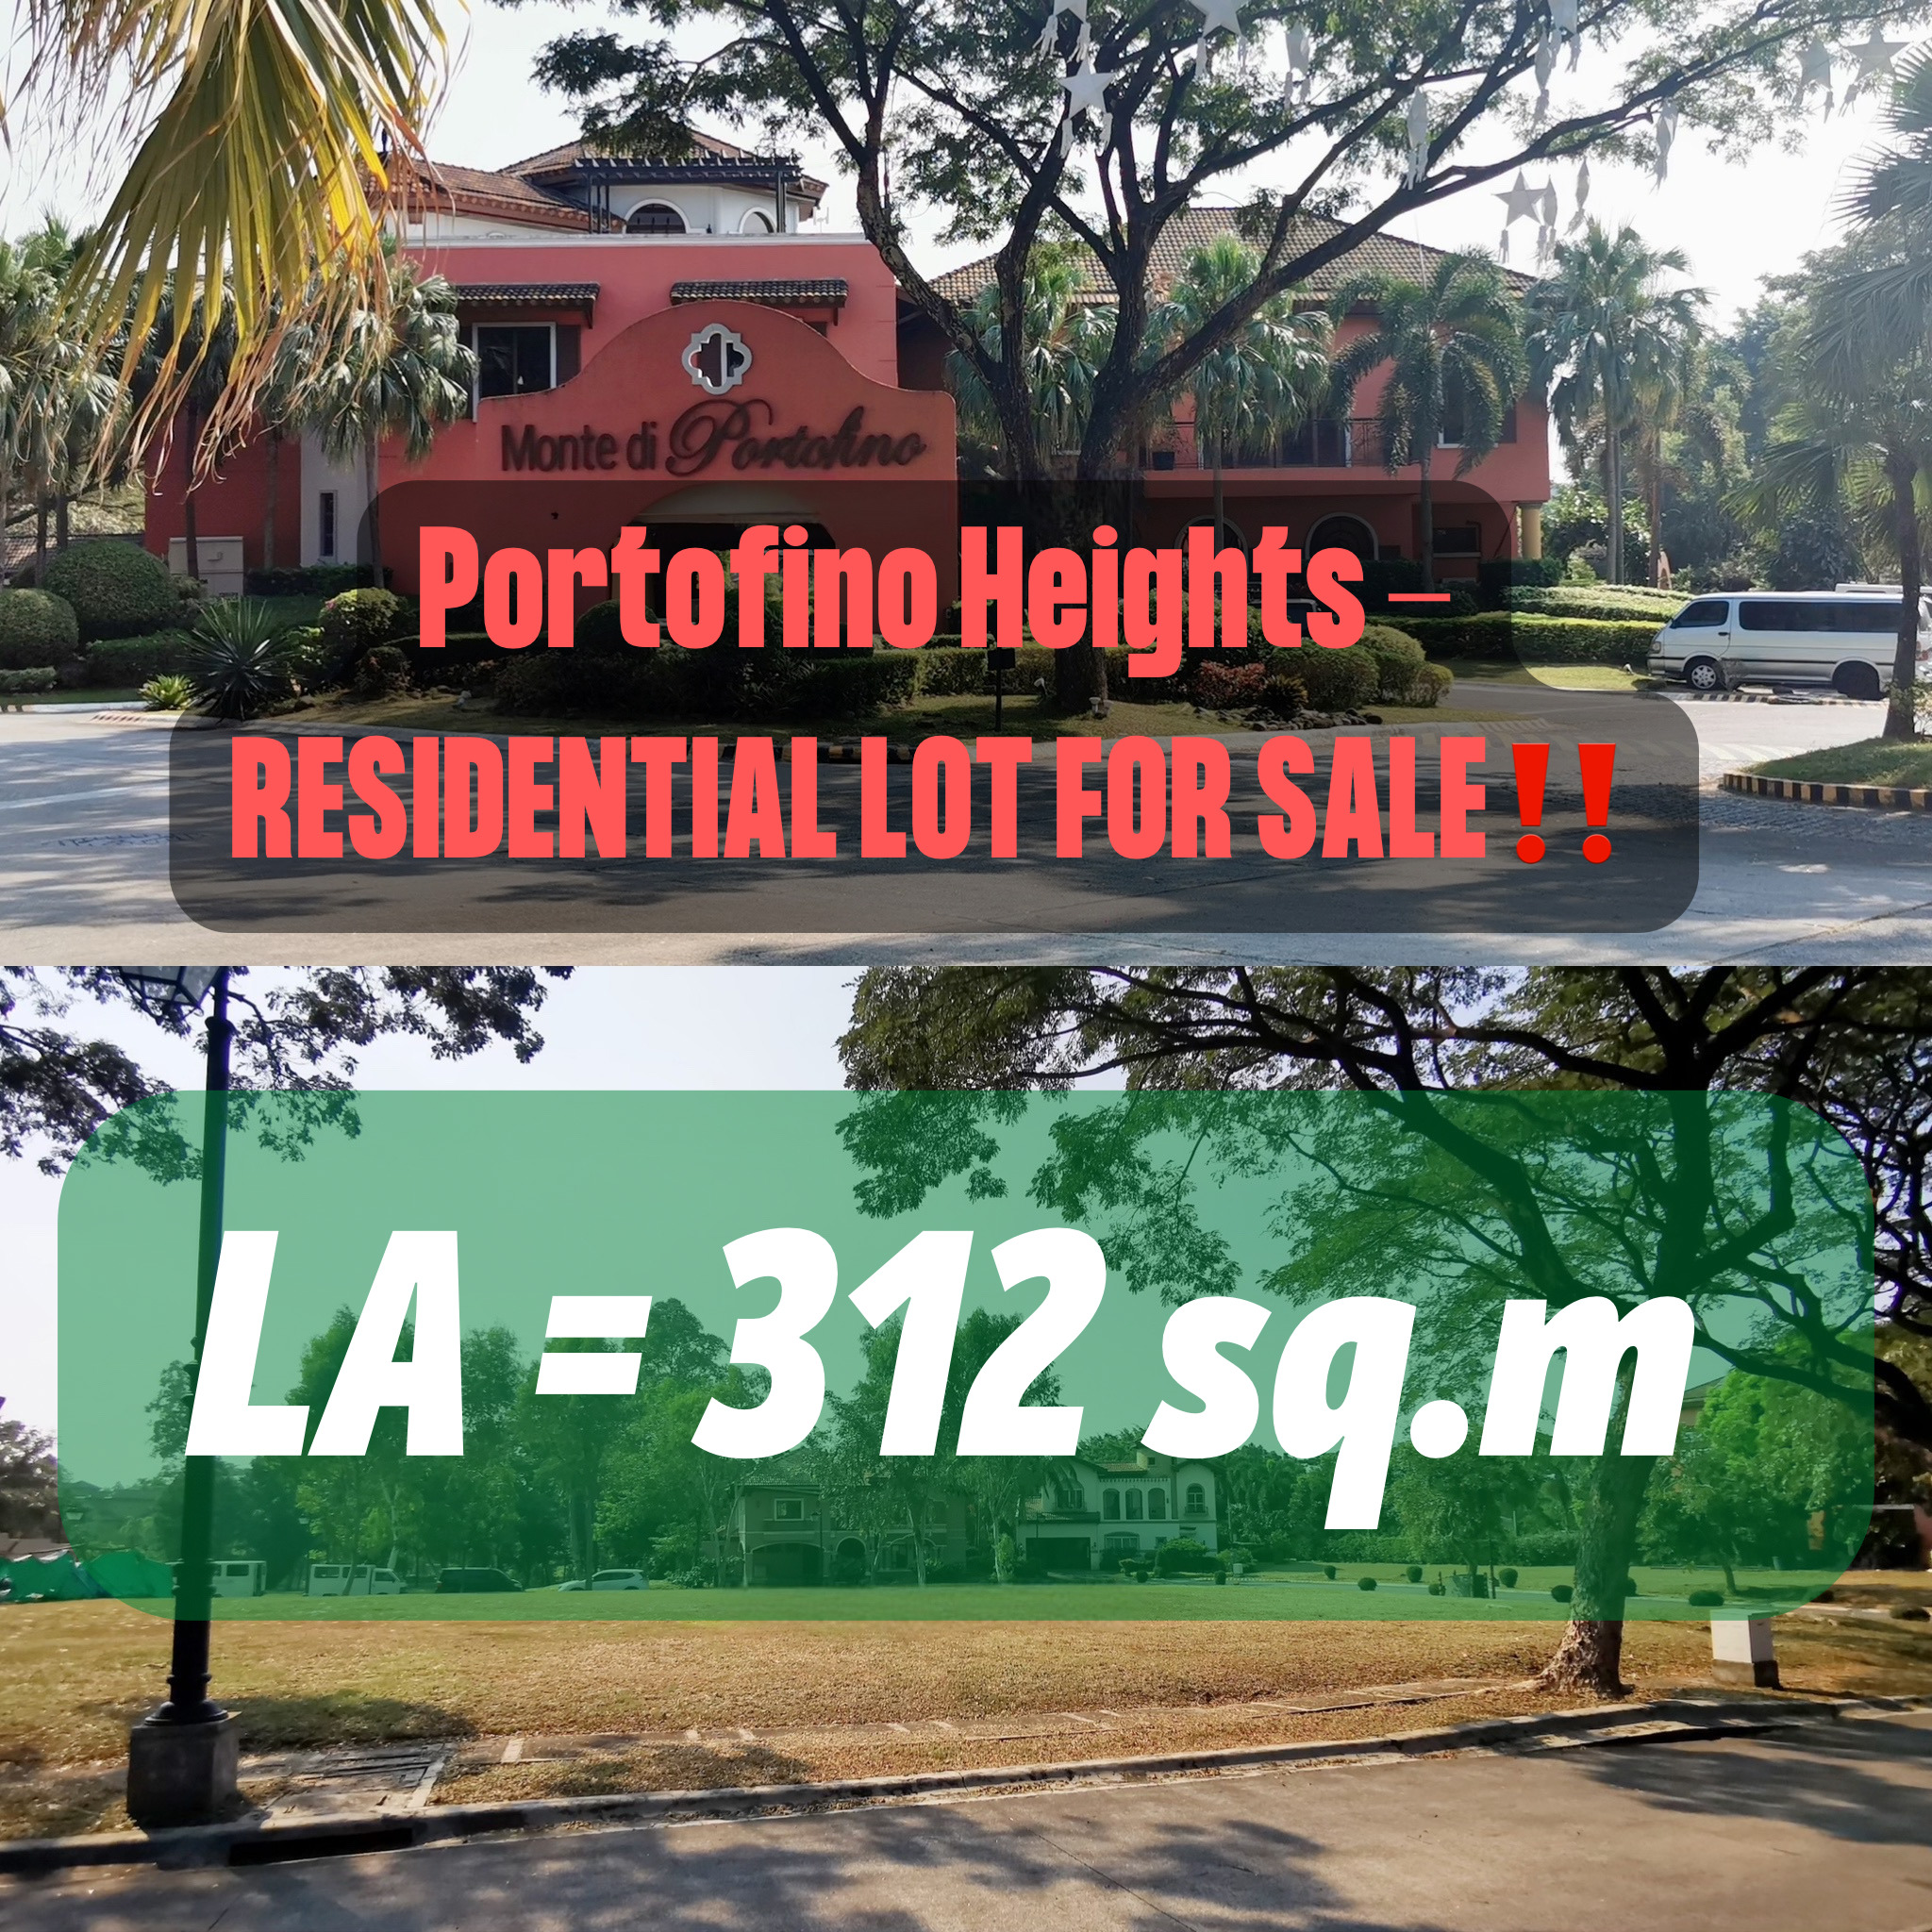 Portofino Heights – RESIDENTIAL LOT FOR SALE‼️